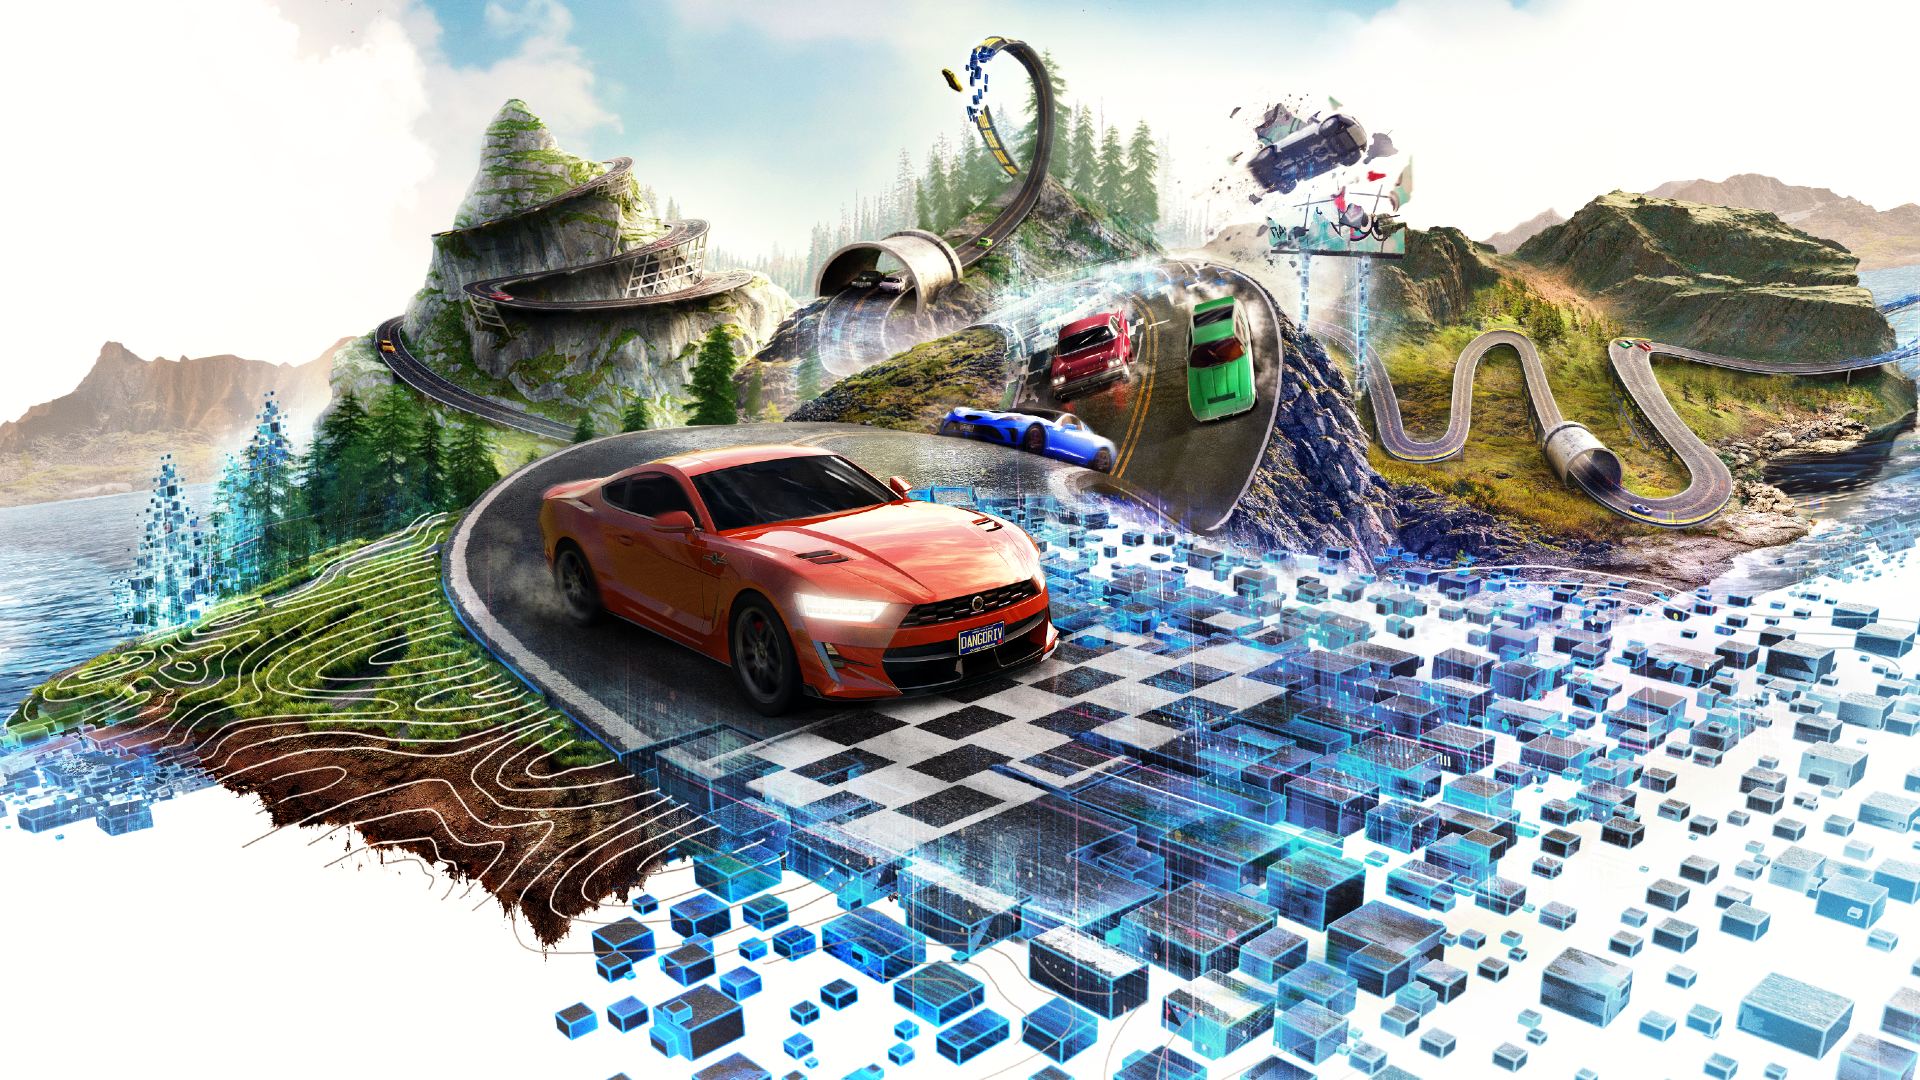 Wreckreation: The MixWorld can be seen with a car racing through it as well.